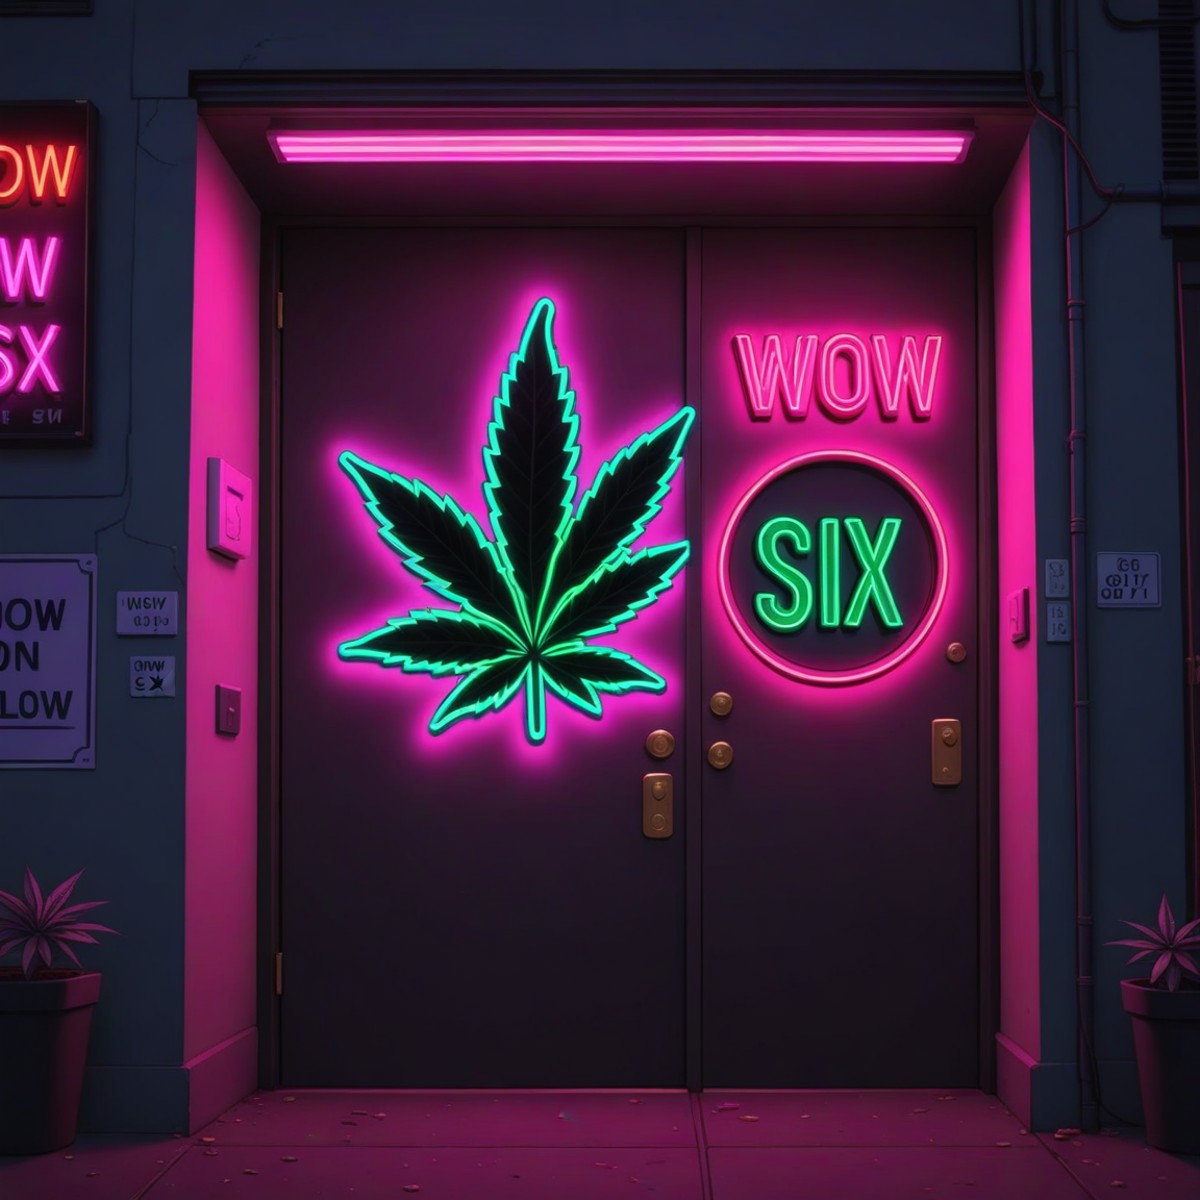 A door with cannabis leaf motif, neon sign reads "(WoW six)" in (bold text:1.35) above the leaf,